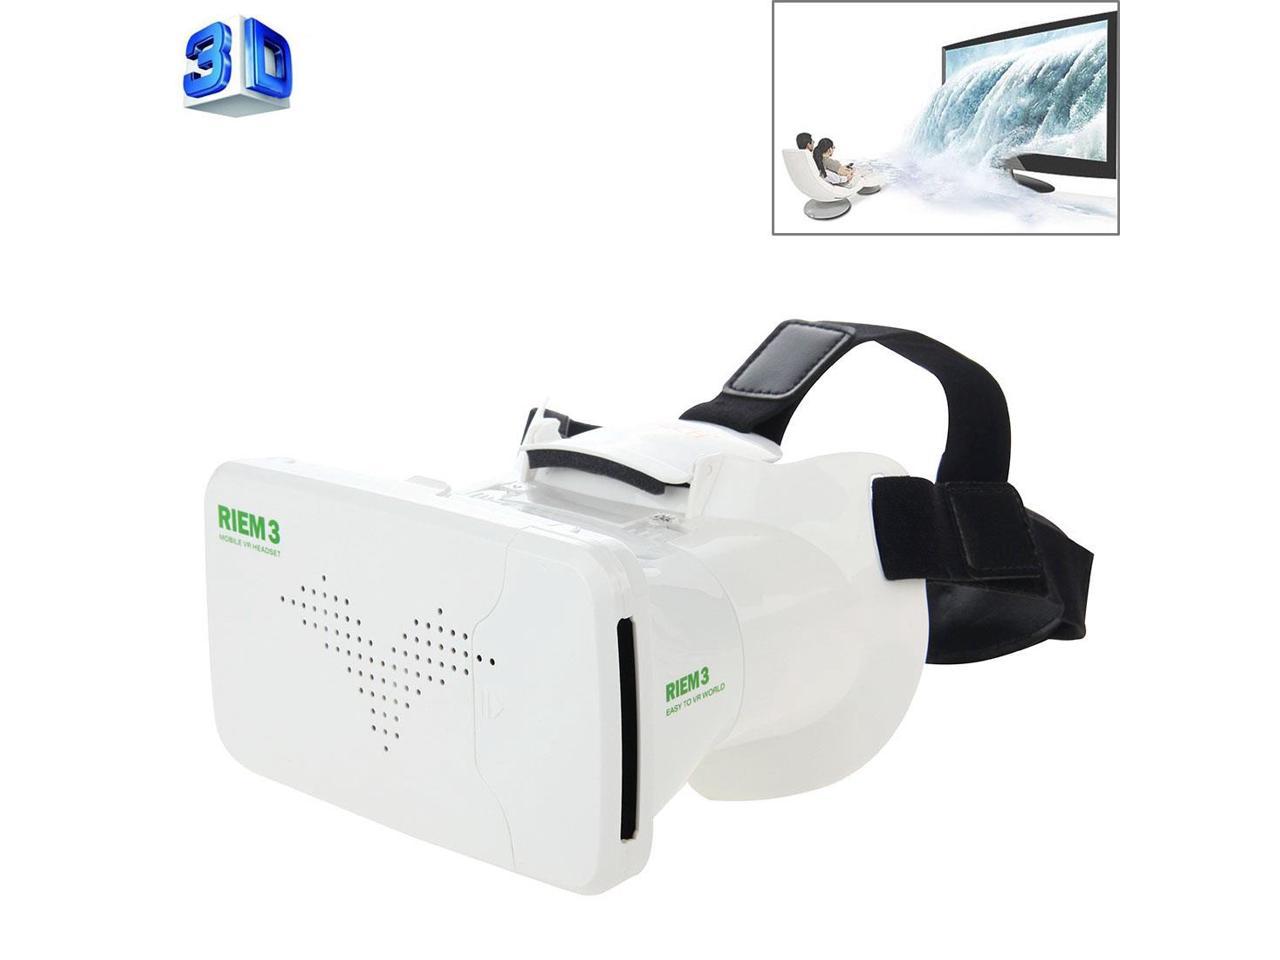 RITECH RIEM 3 Universal Virtual Reality 3D Video Glasses for 3.5 to 6 inch Smartphones(White)